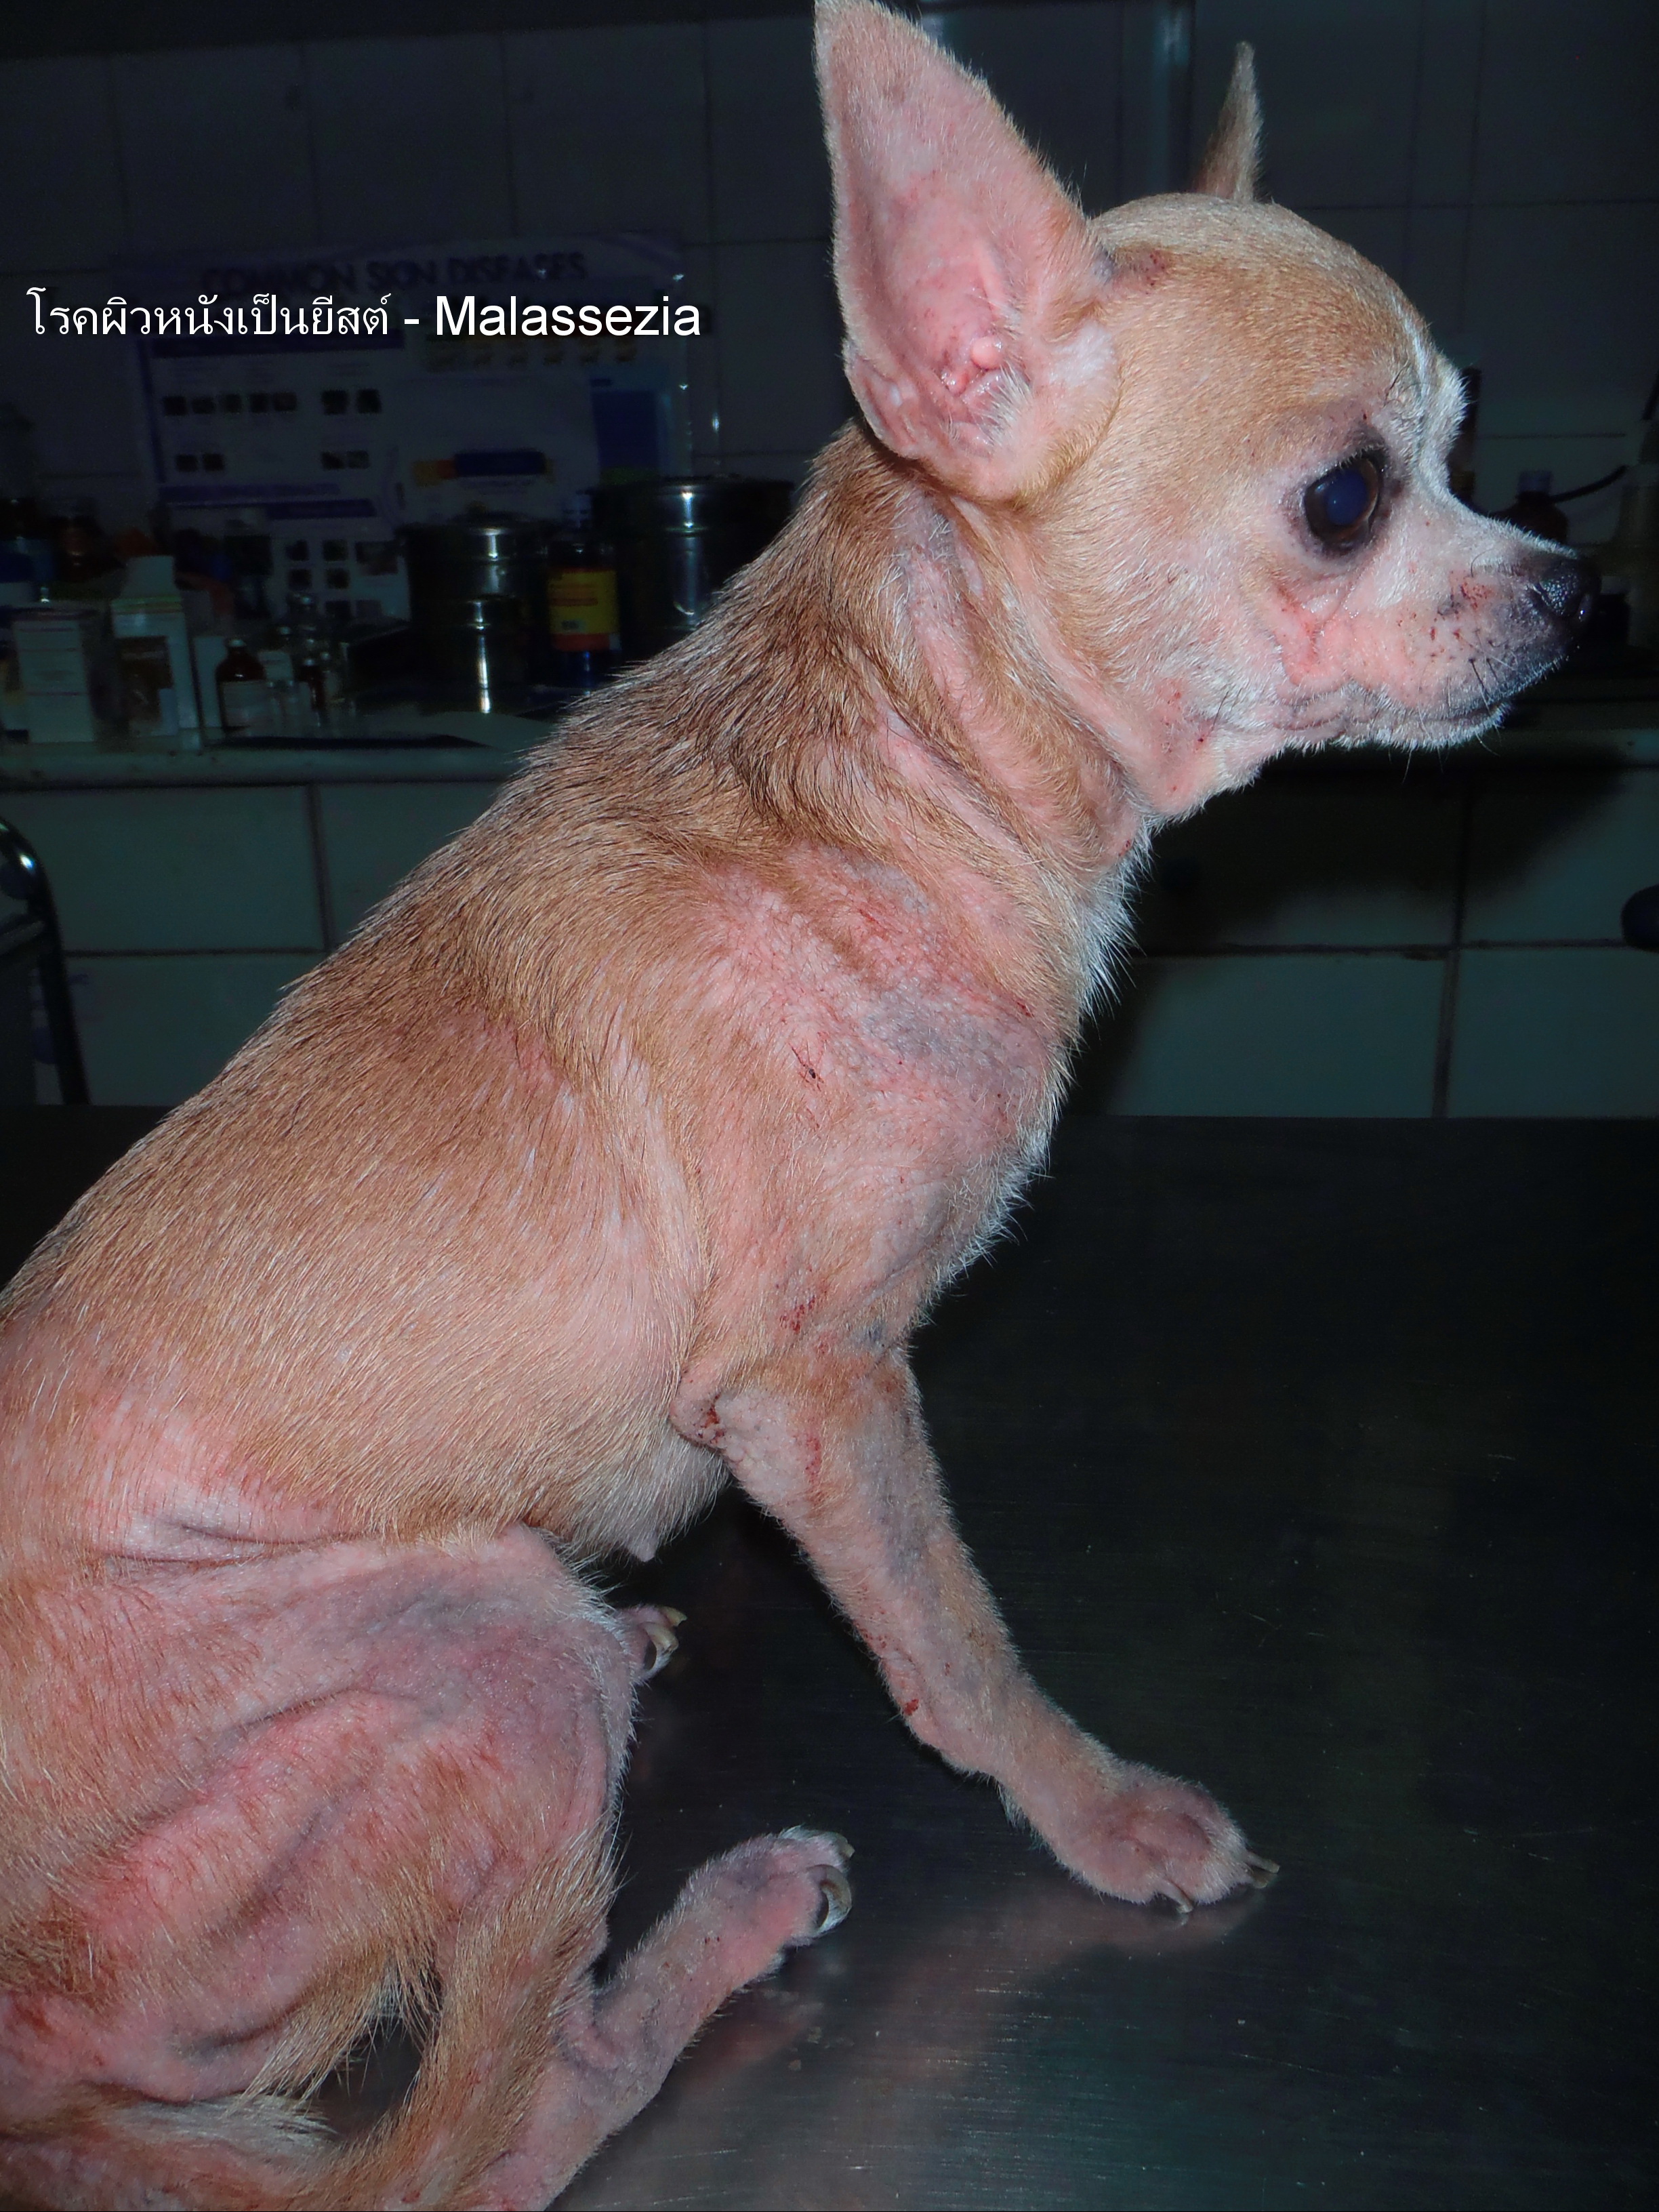 Dog suffers from yeast infection called Malassezia